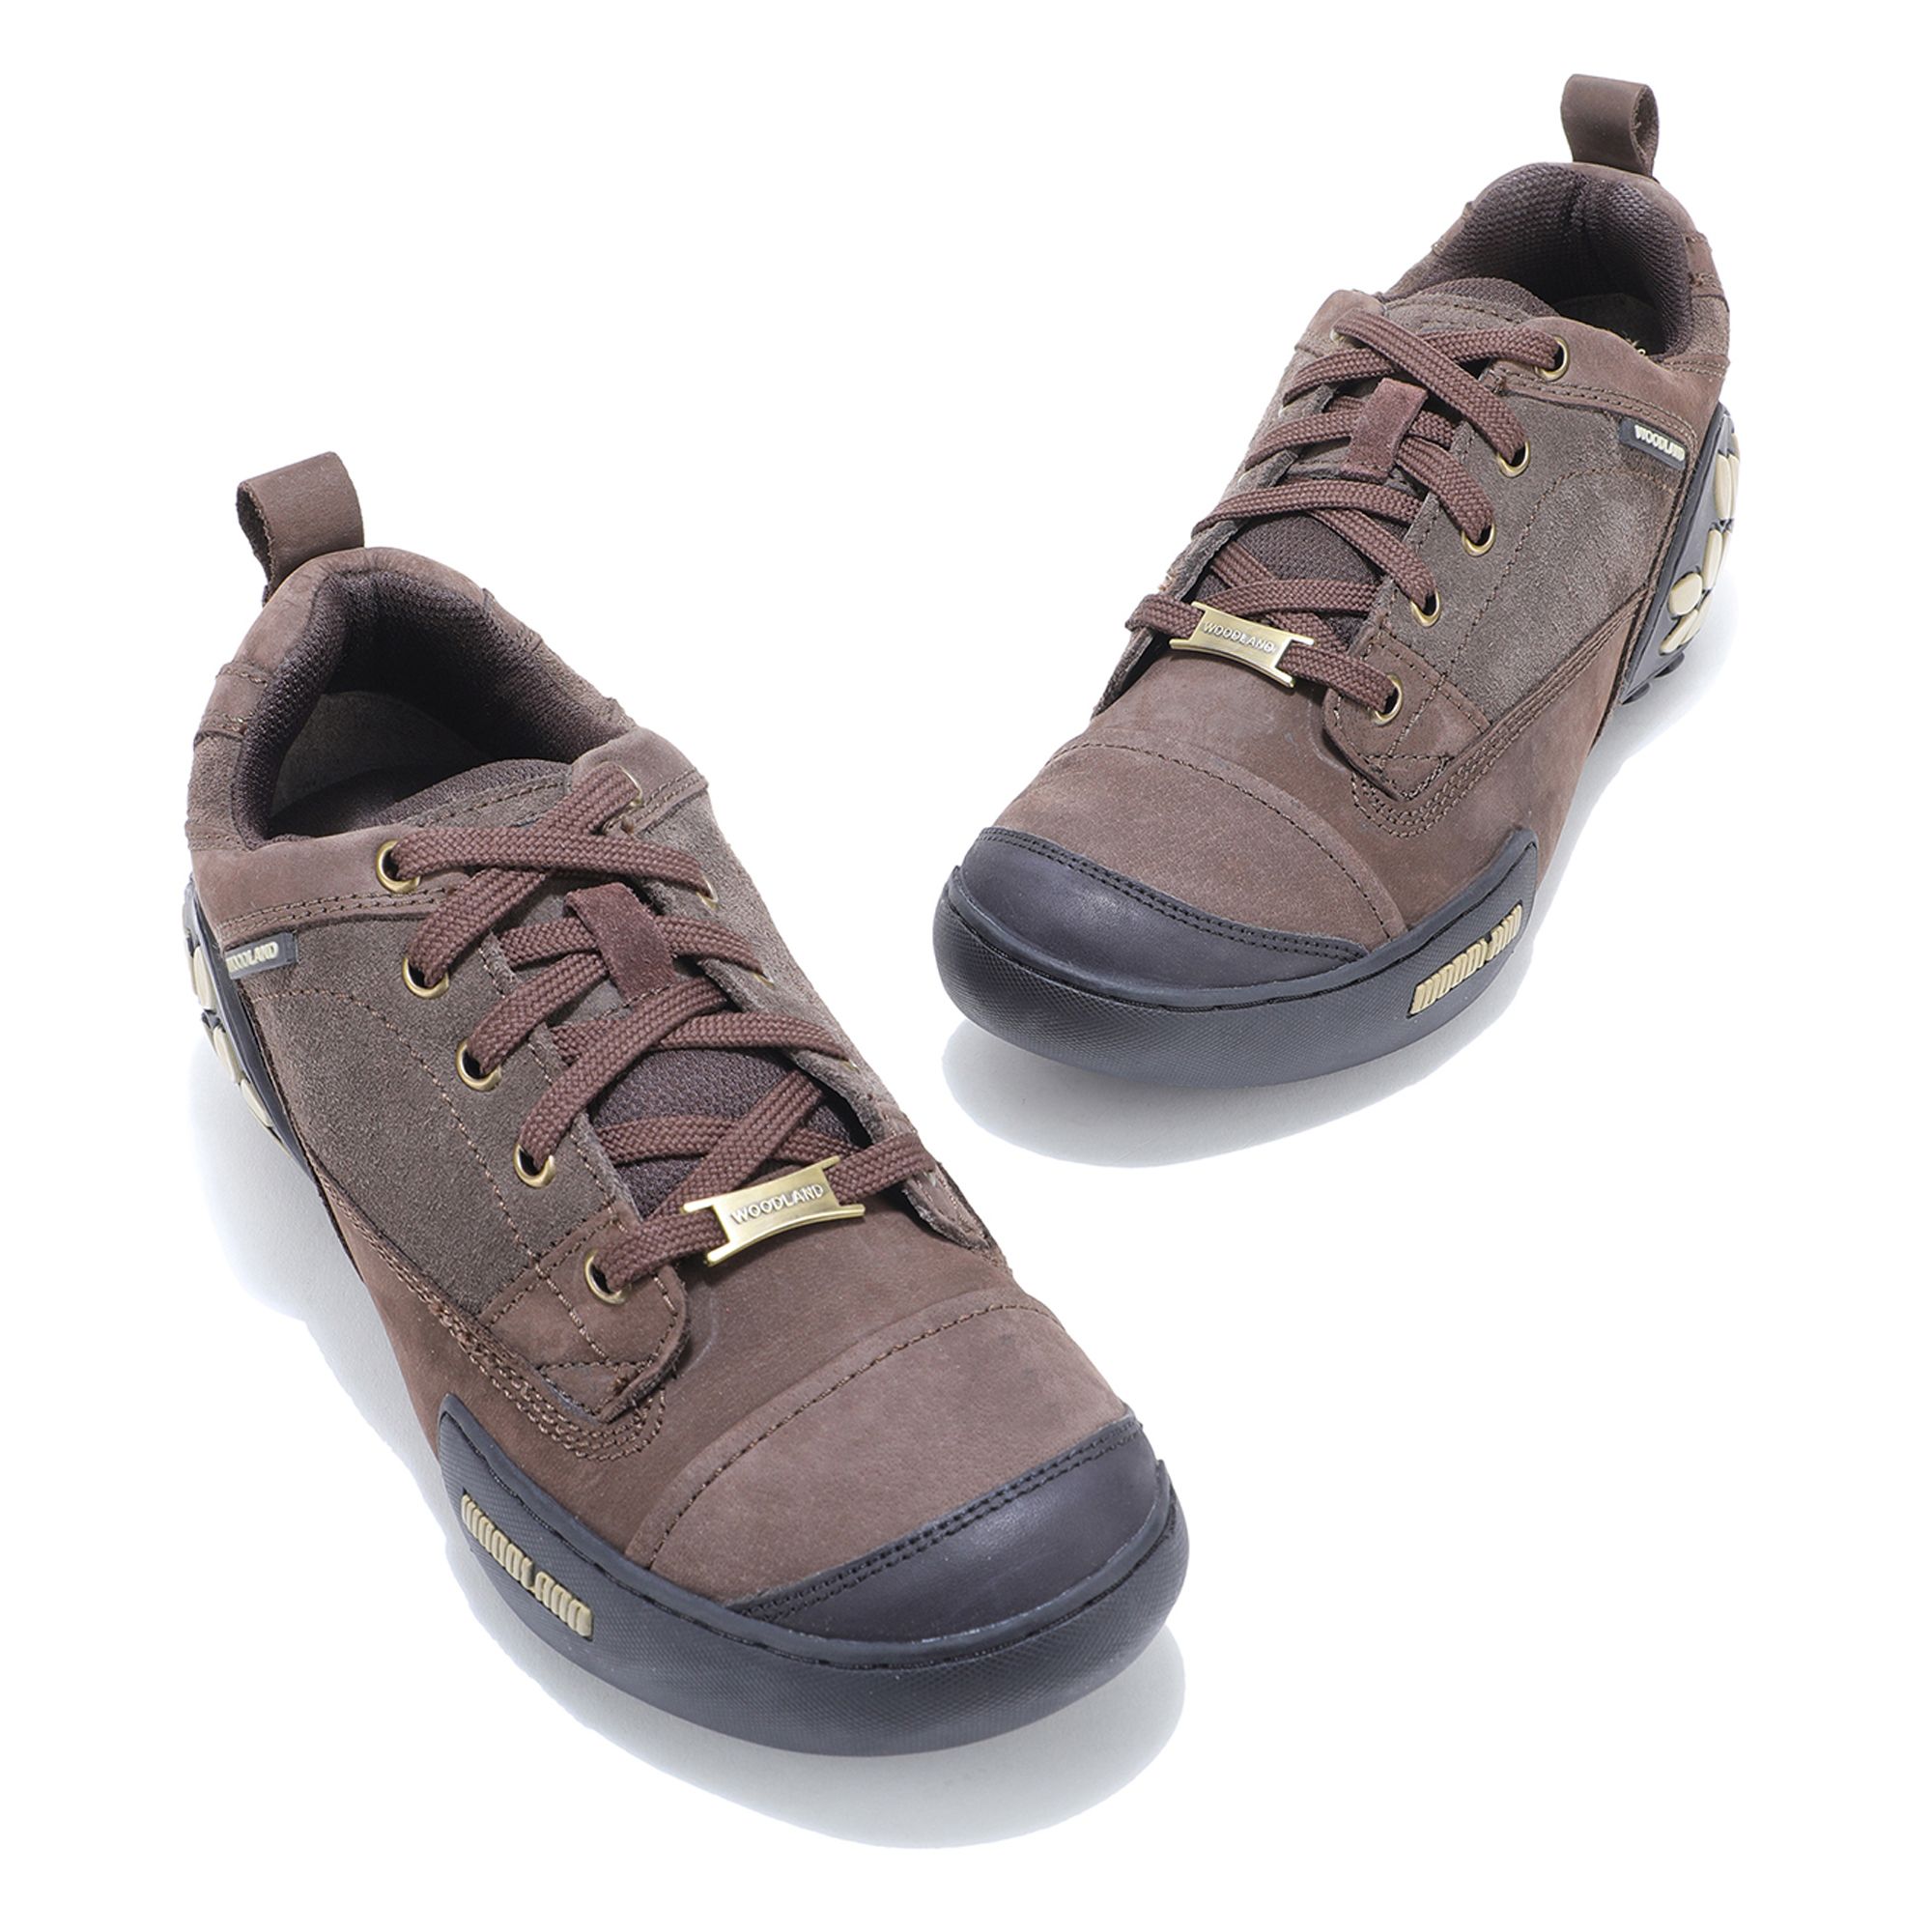 Woodland casual shoes for Men in Brown  Colour